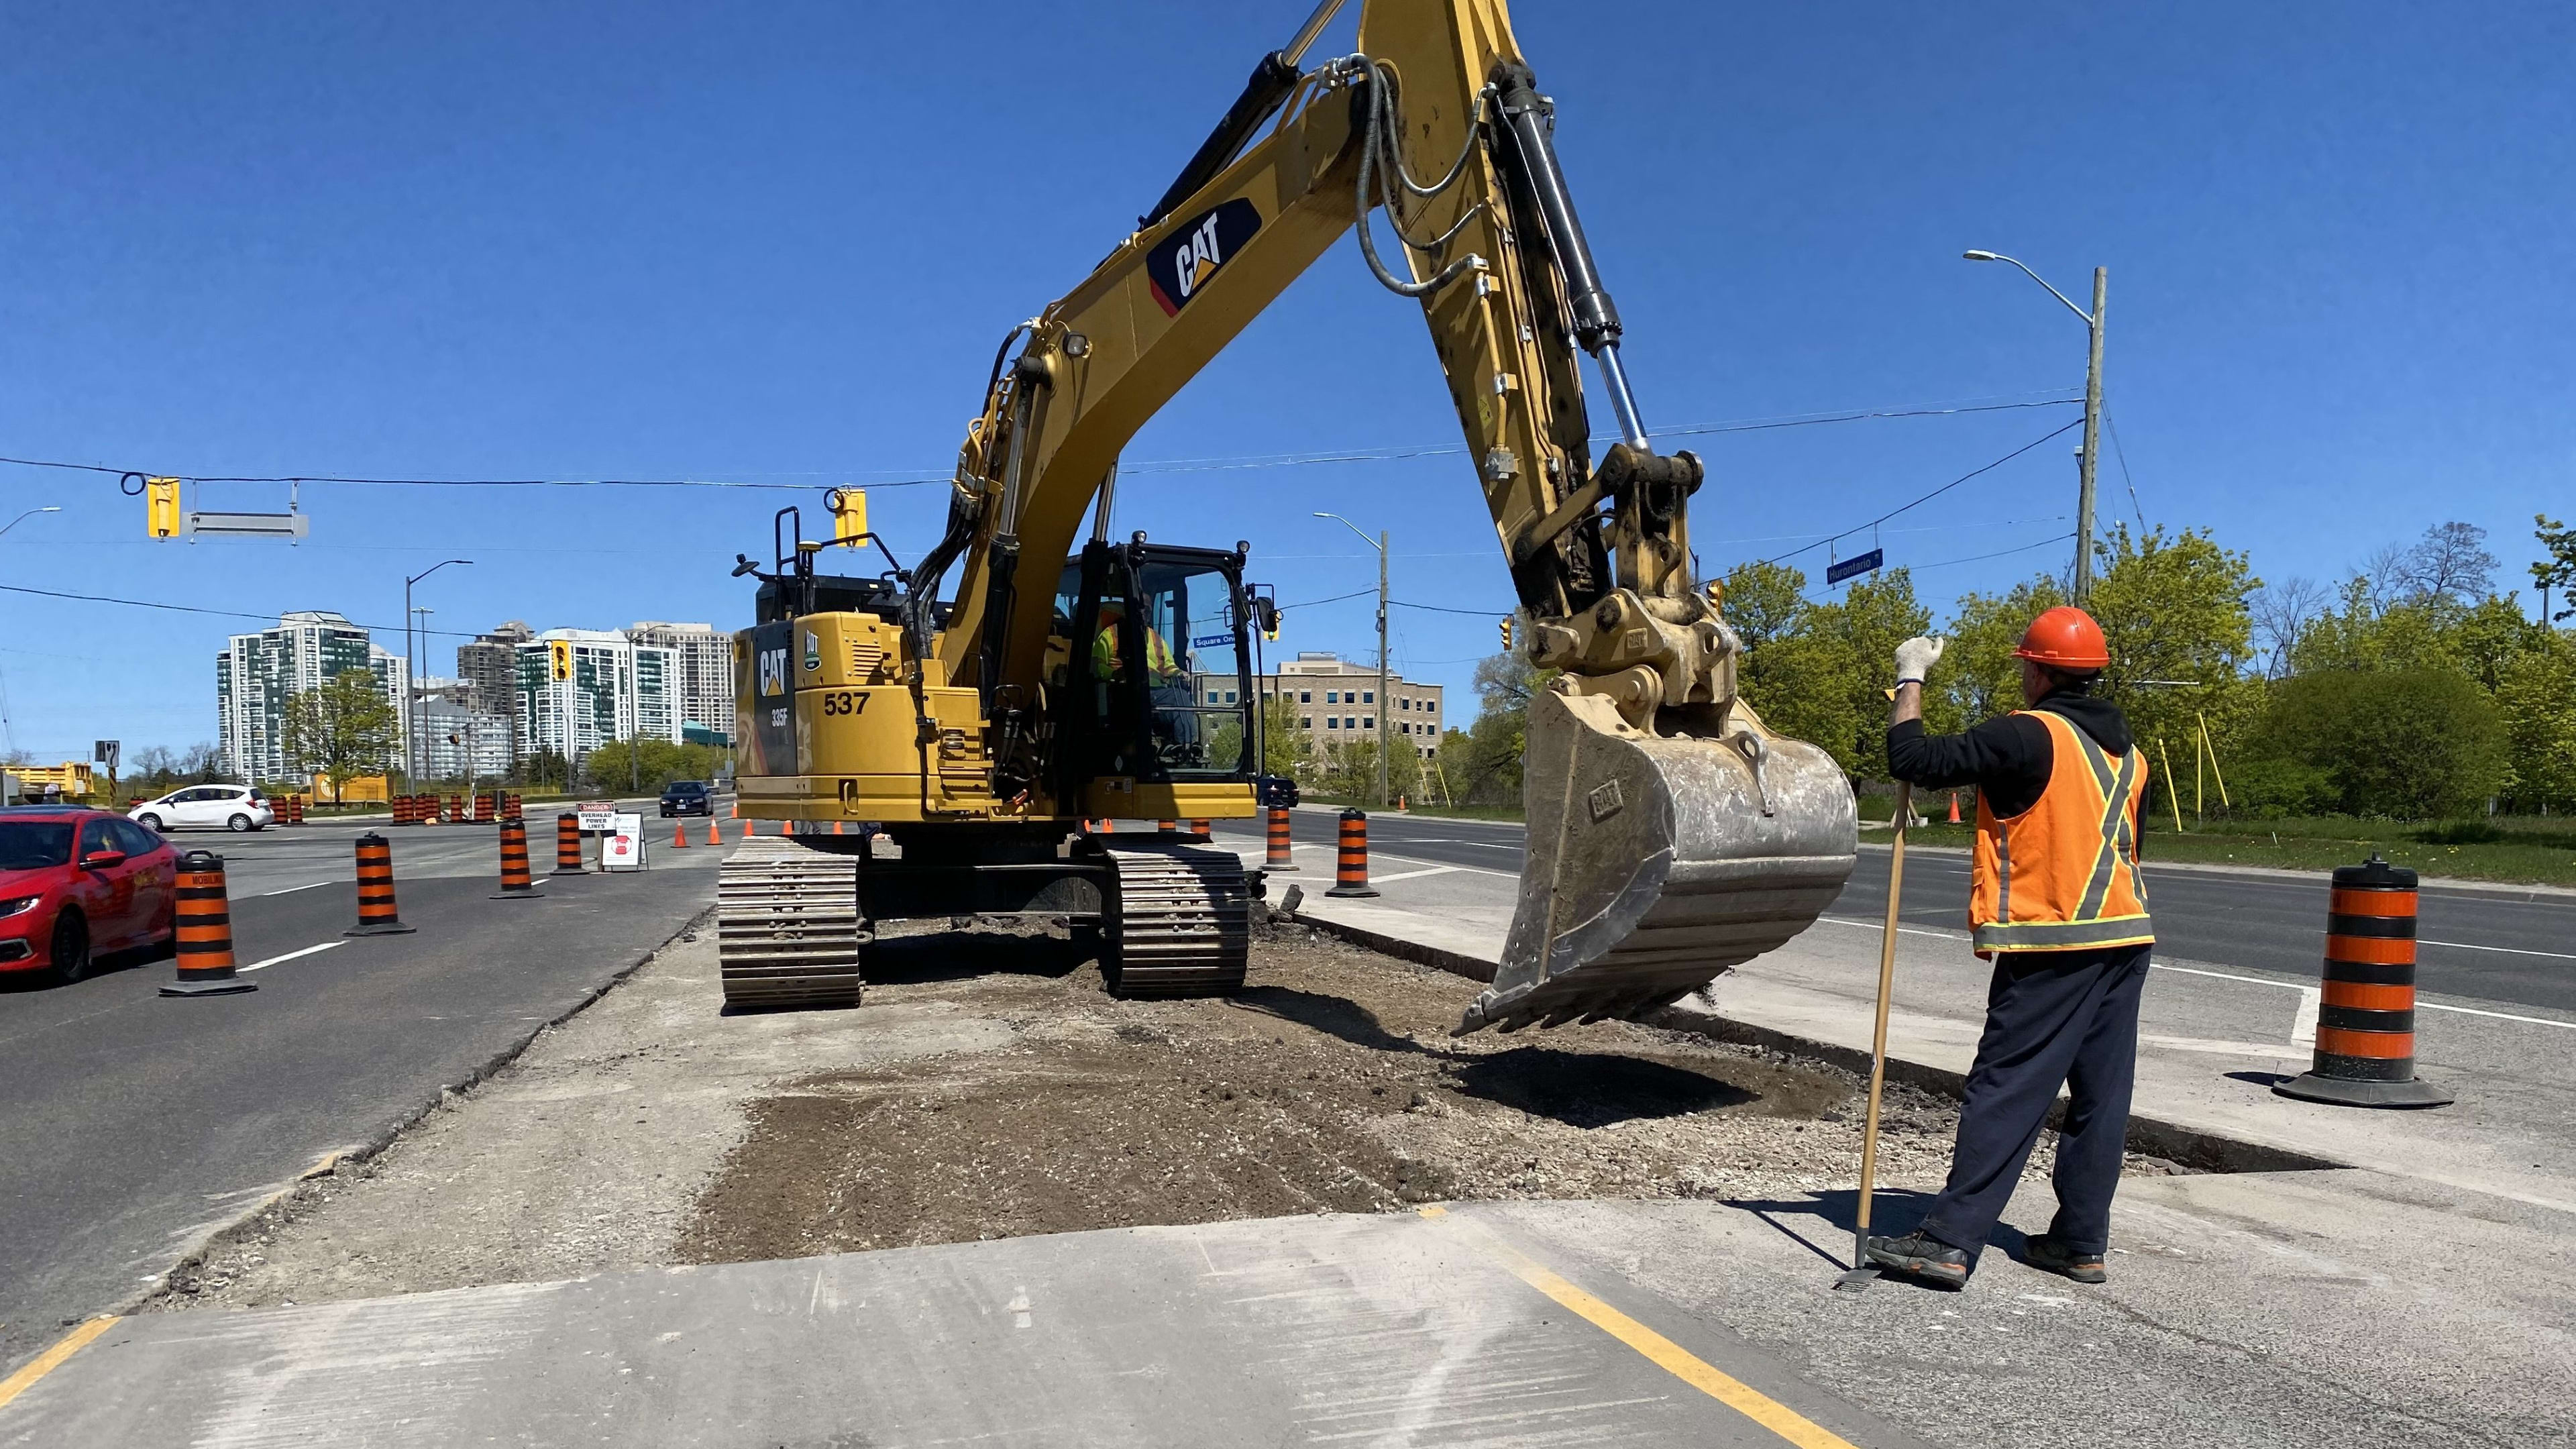 An excavator works along Hurontario while a construction worker looks on